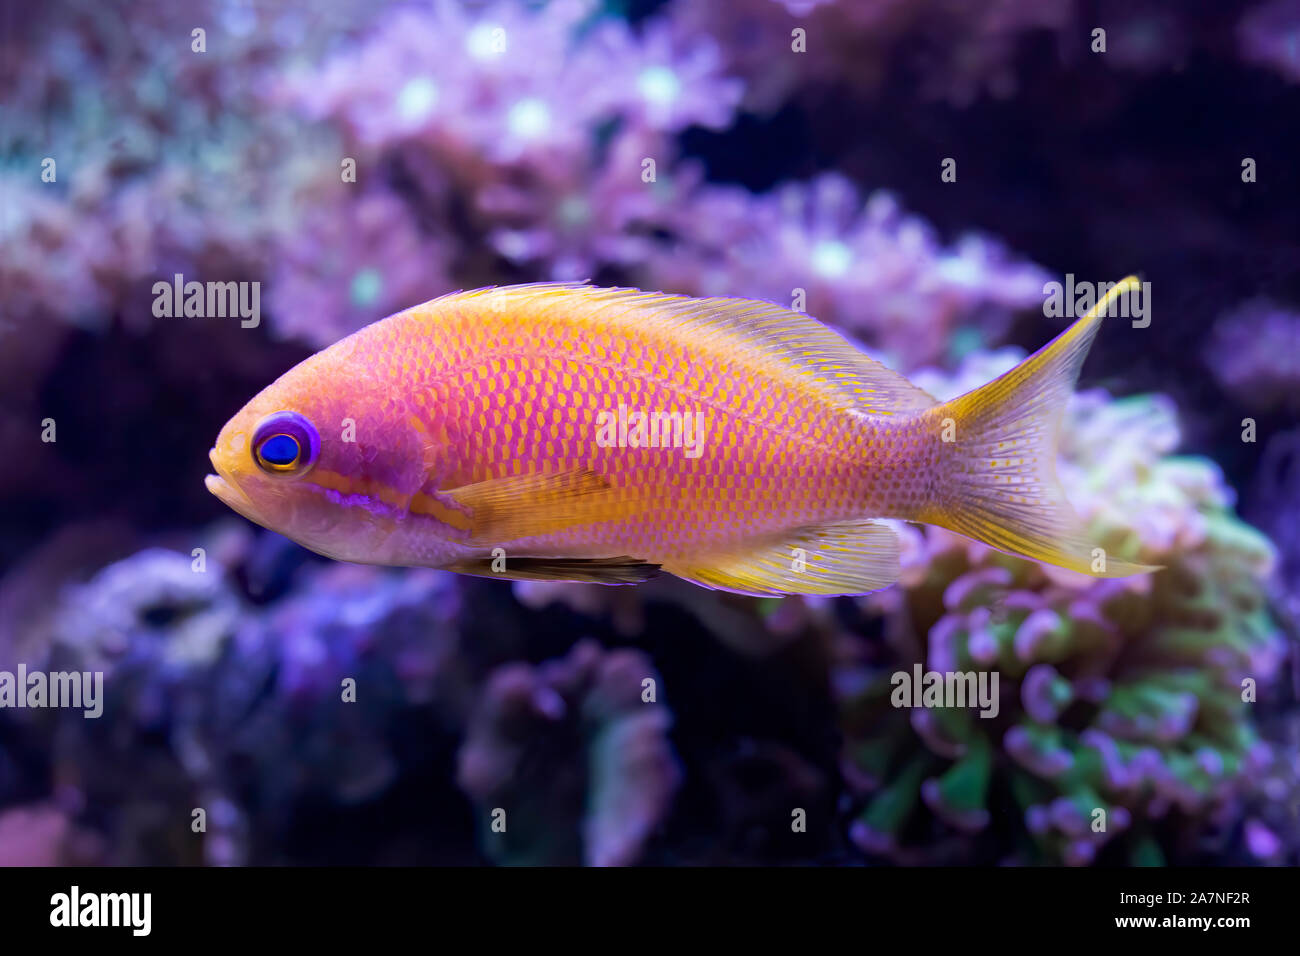 Close up detail of blue eyed anthias tropical fish in aquarium with corals.  Fish is bright pink and yellow. Stock Photo